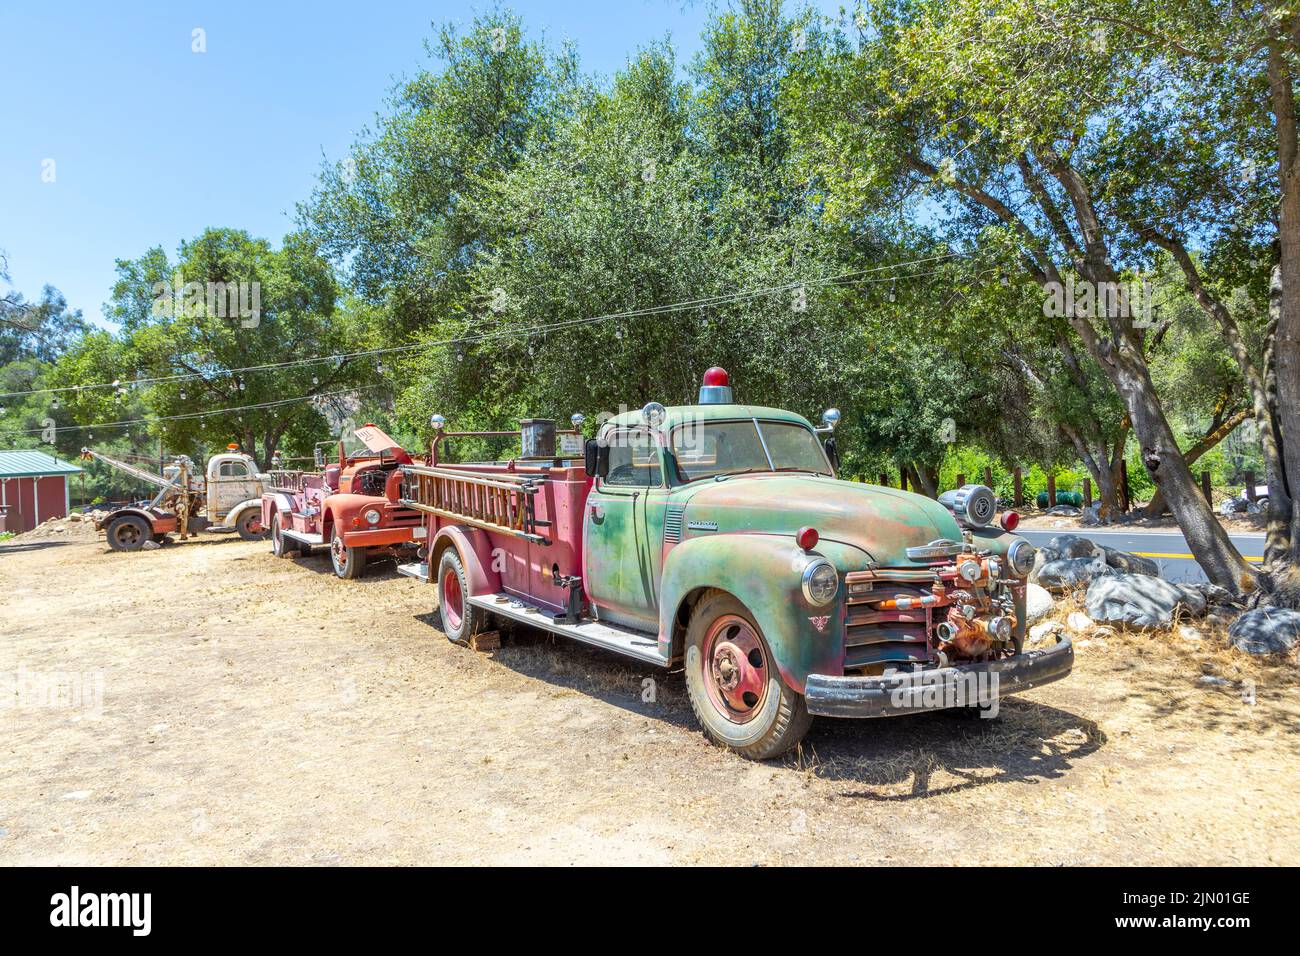 Three Rivers, USA - May 21, 2022: old vintage dirty  fire engine car at an outdoor loam parking lot in three rivers. Stock Photo